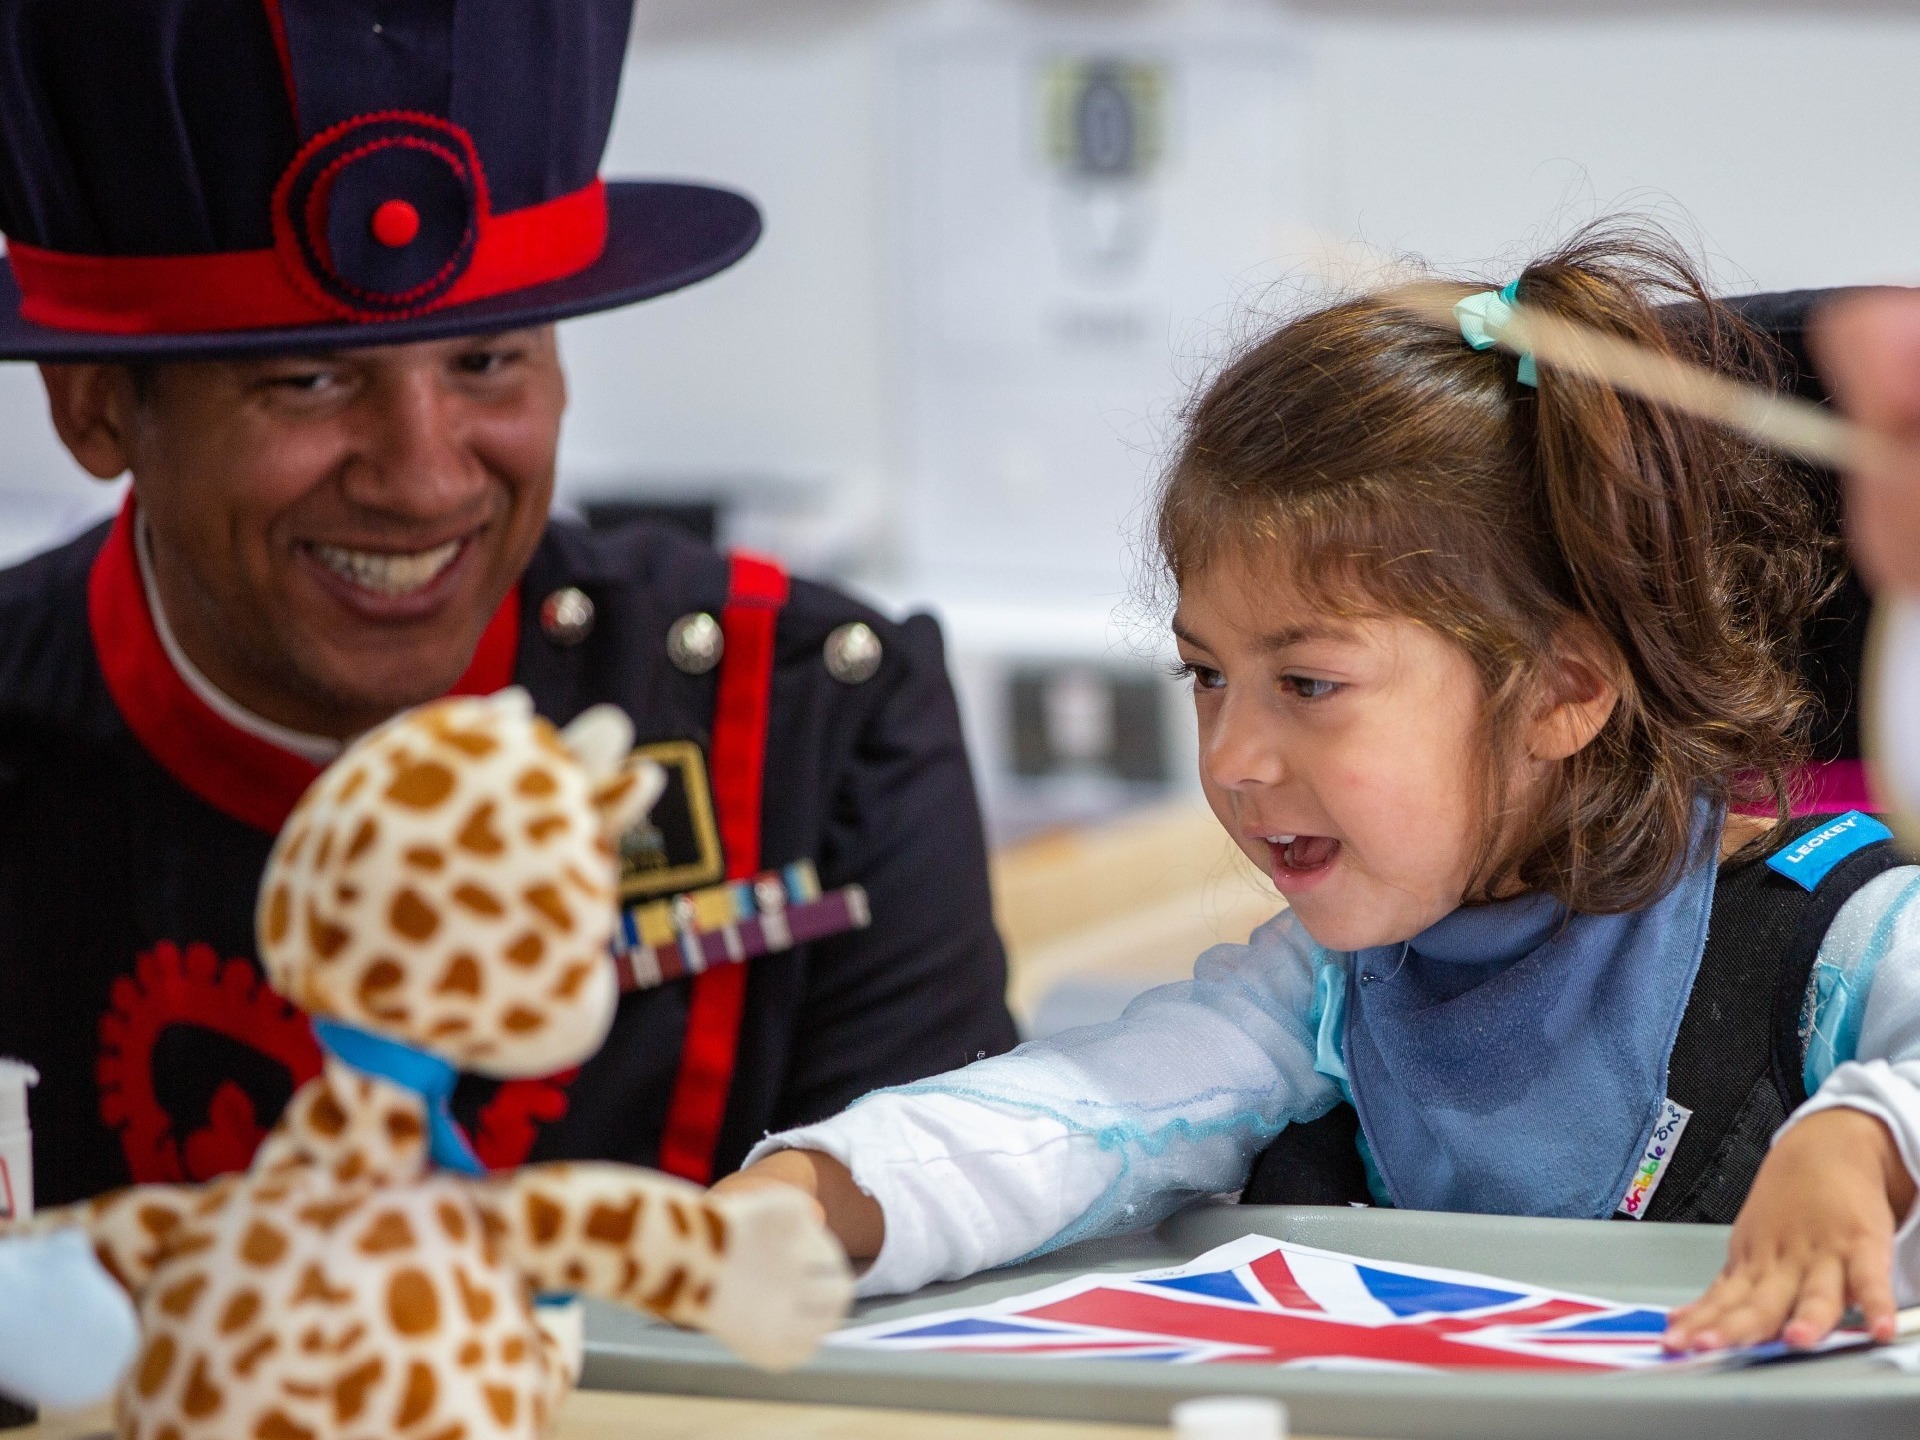 HR Beefeater visiting a disabled girl in a wheelchair at British Values Day Lonsdale School